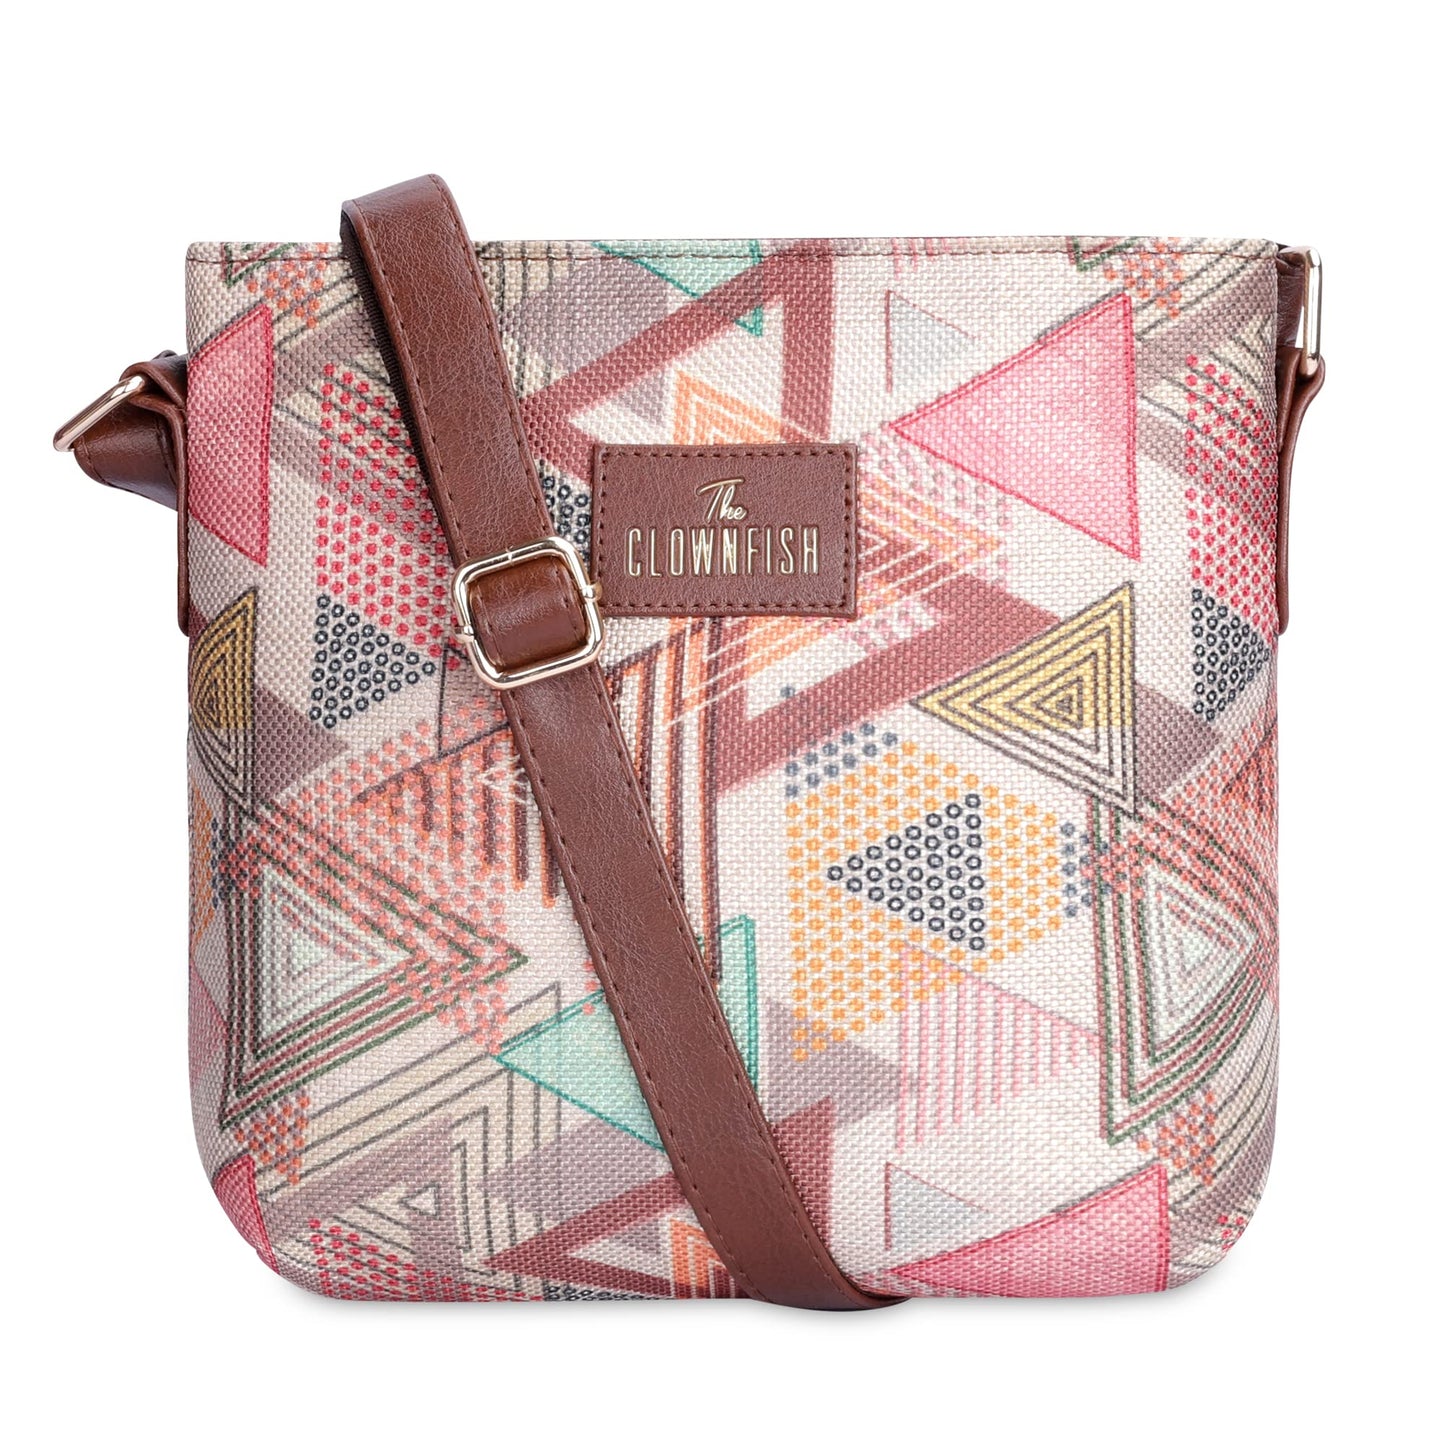 THE CLOWNFISH Aahna Printed Handicraft Fabric Crossbody Sling bag for Women Casual Party Bag Purse with Adjustable Shoulder Strap for Ladies College Girls Multicolour-Triangle Design